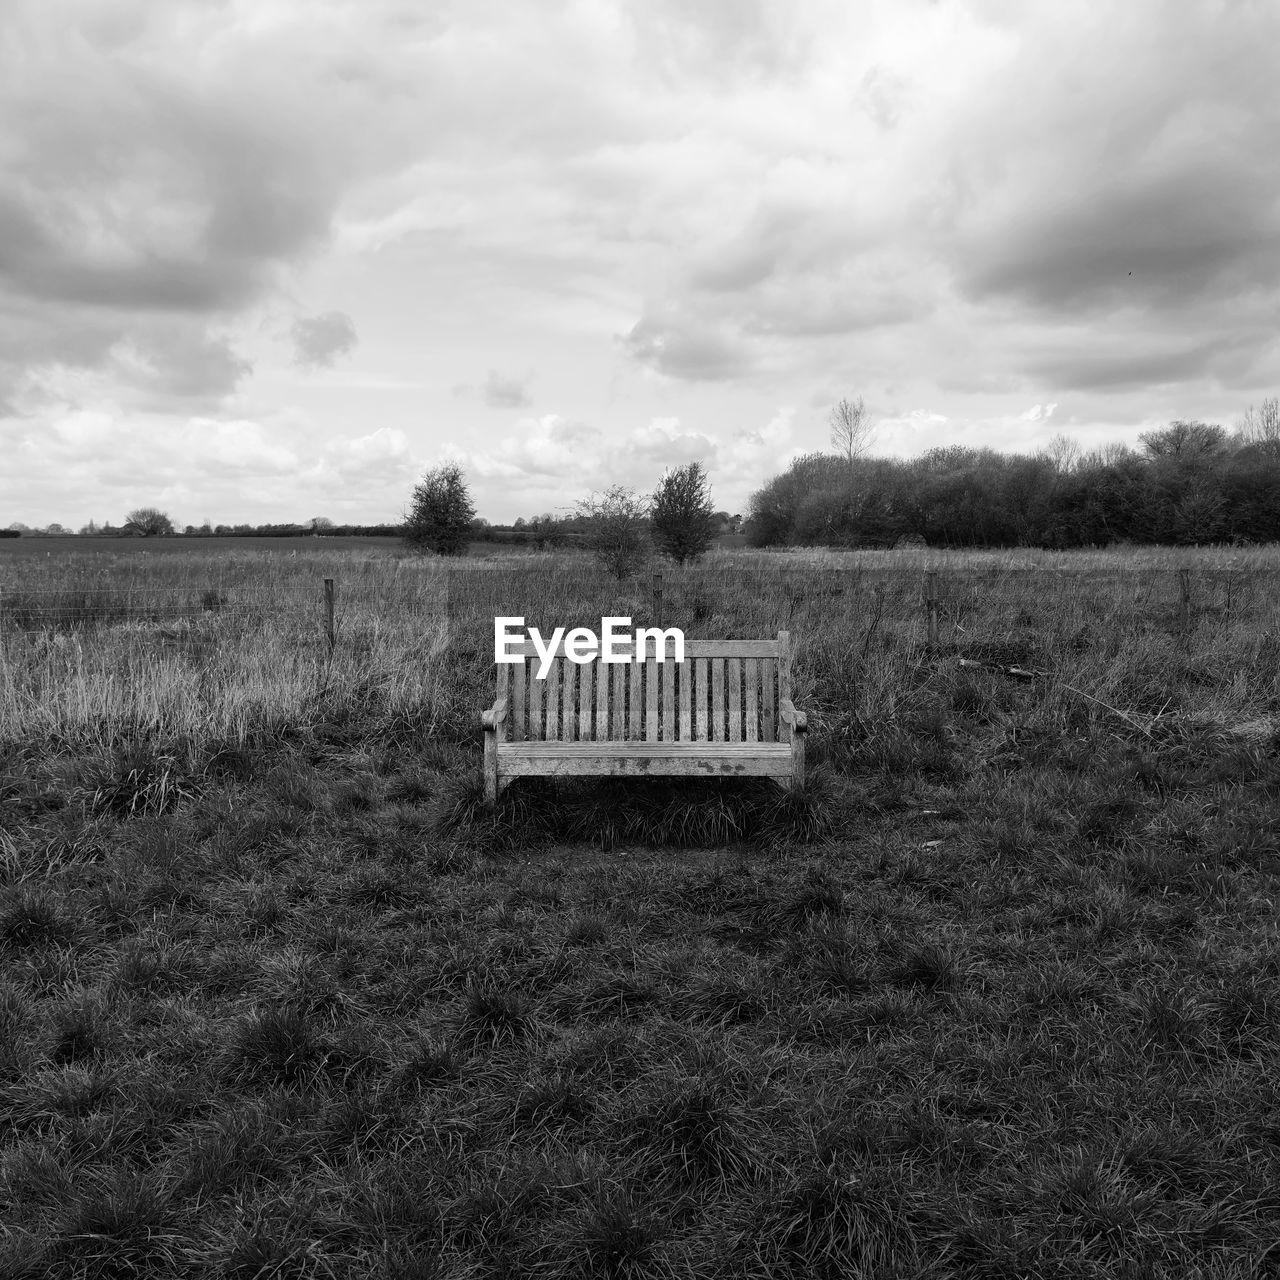 A minimalist image of a bench in the english countryside